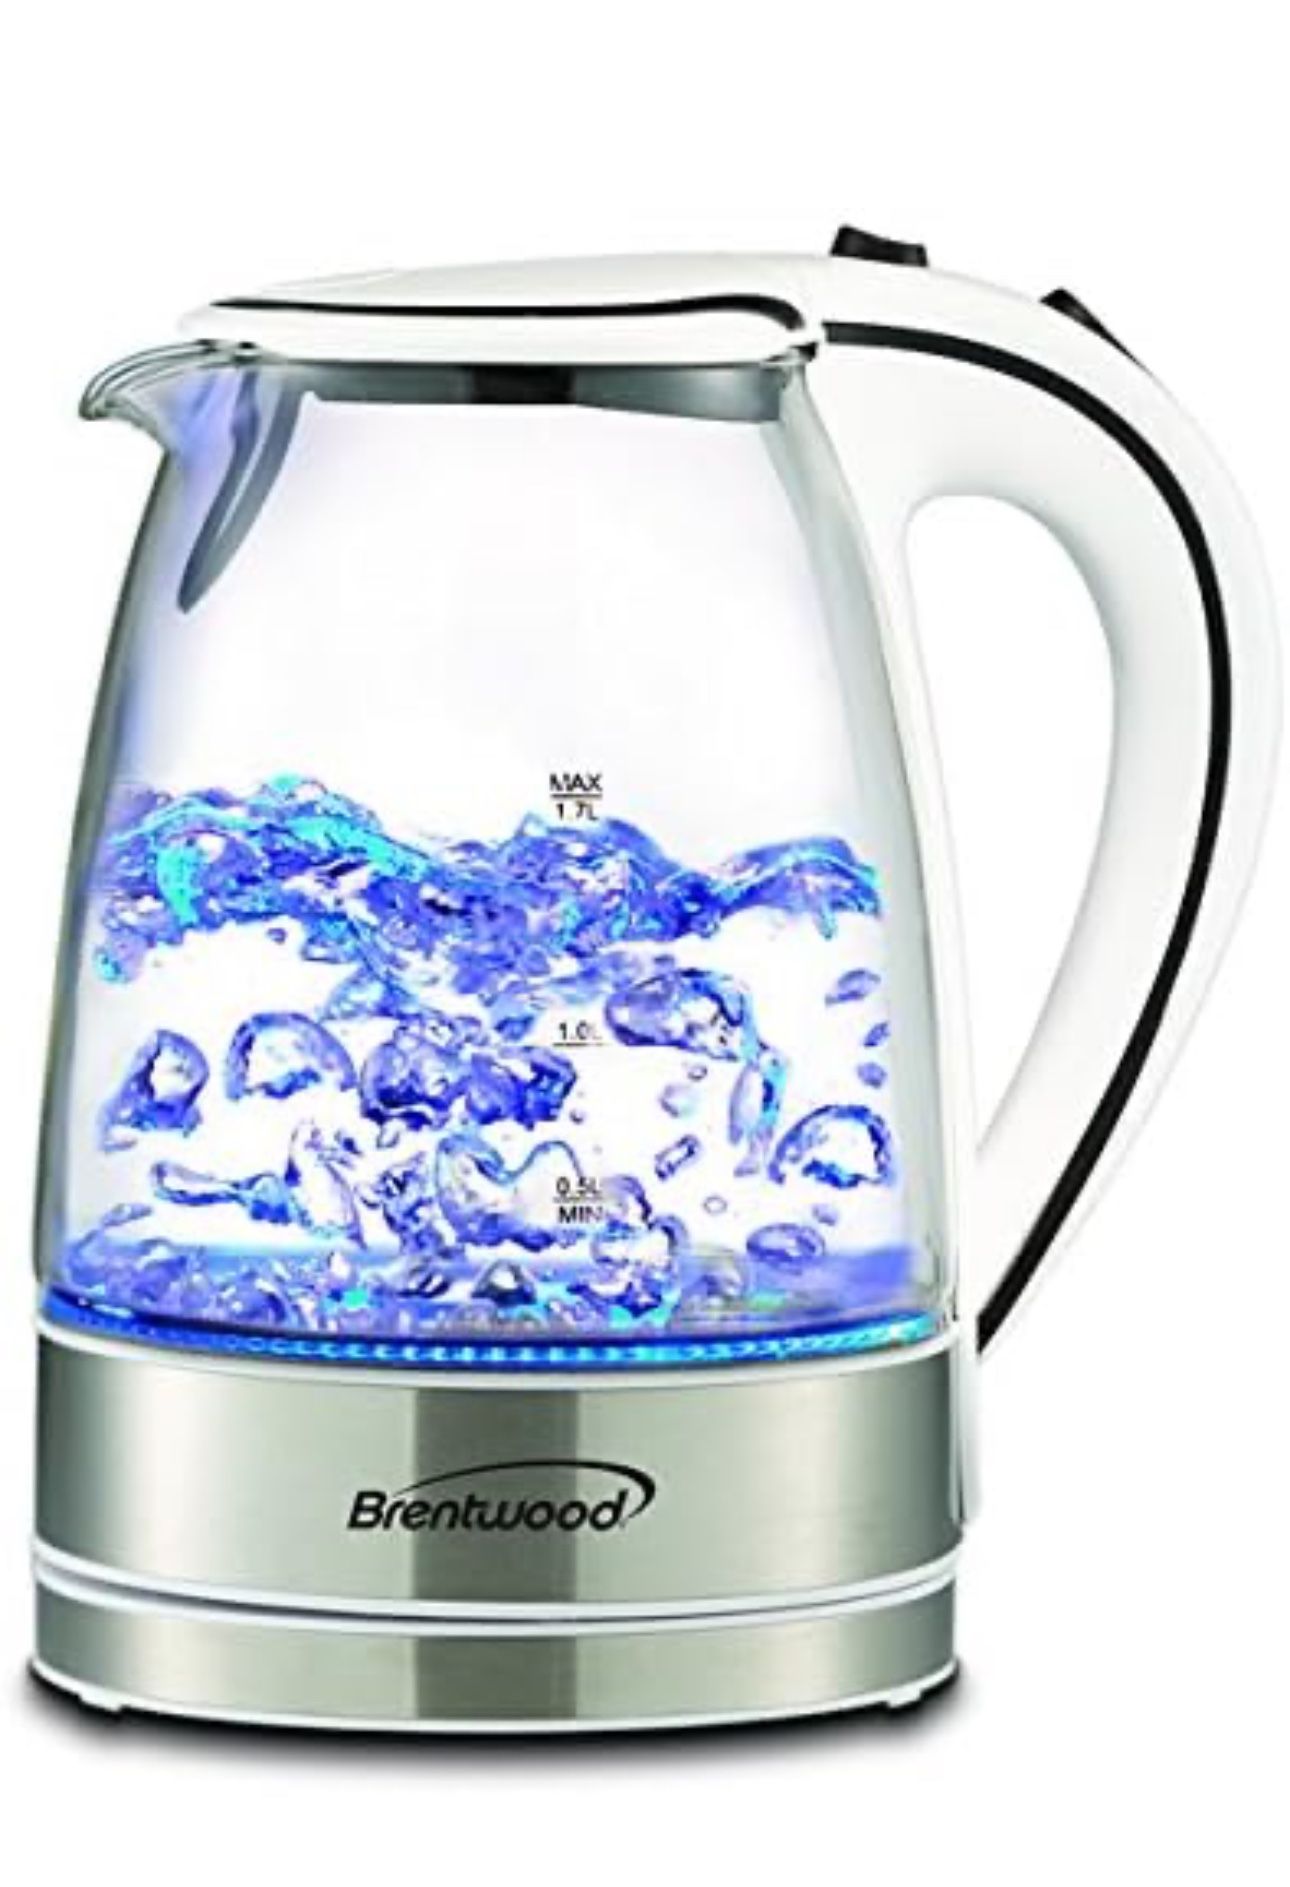 Electric Tea Kettle - Premium 1.7L Cordless - Clear Tempered Gass with Quiet Boil - Cool Touch Handle and Auto Shut off Basic Finds By Brentwood (Whit